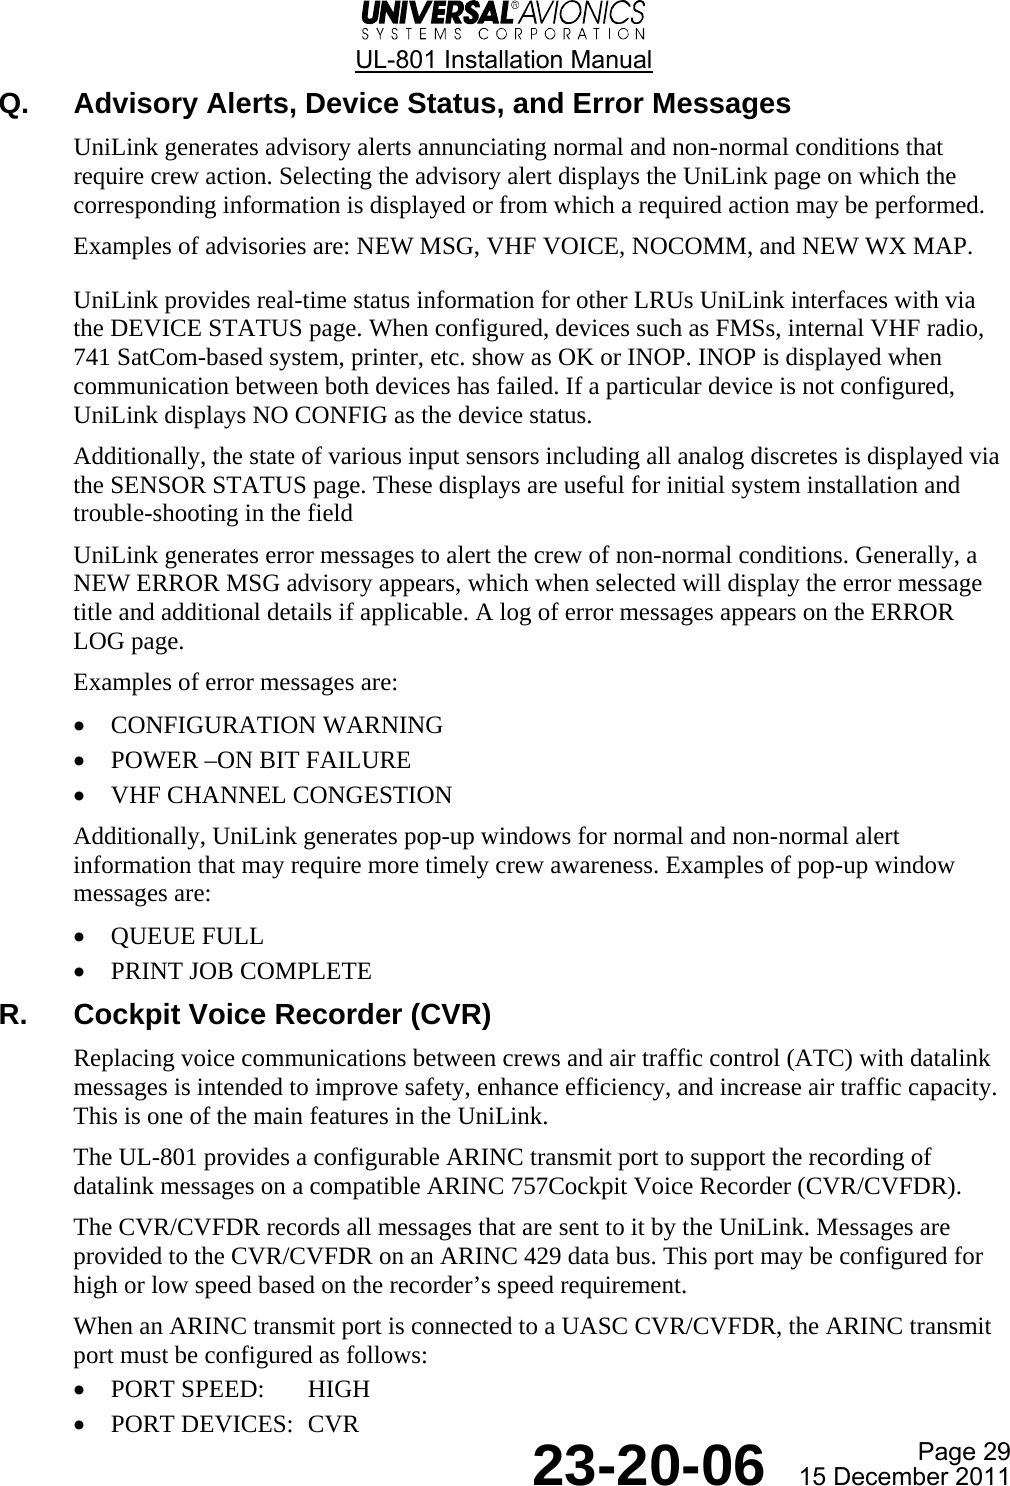  UL-801 Installation Manual  Page 29  23-20-06  15 December 2011 Q. Advisory Alerts, Device Status, and Error Messages UniLink generates advisory alerts annunciating normal and non-normal conditions that require crew action. Selecting the advisory alert displays the UniLink page on which the corresponding information is displayed or from which a required action may be performed. Examples of advisories are: NEW MSG, VHF VOICE, NOCOMM, and NEW WX MAP. UniLink provides real-time status information for other LRUs UniLink interfaces with via the DEVICE STATUS page. When configured, devices such as FMSs, internal VHF radio, 741 SatCom-based system, printer, etc. show as OK or INOP. INOP is displayed when communication between both devices has failed. If a particular device is not configured, UniLink displays NO CONFIG as the device status. Additionally, the state of various input sensors including all analog discretes is displayed via the SENSOR STATUS page. These displays are useful for initial system installation and trouble-shooting in the field UniLink generates error messages to alert the crew of non-normal conditions. Generally, a NEW ERROR MSG advisory appears, which when selected will display the error message title and additional details if applicable. A log of error messages appears on the ERROR LOG page. Examples of error messages are: • CONFIGURATION WARNING • POWER –ON BIT FAILURE • VHF CHANNEL CONGESTION Additionally, UniLink generates pop-up windows for normal and non-normal alert information that may require more timely crew awareness. Examples of pop-up window messages are: • QUEUE FULL • PRINT JOB COMPLETE R.  Cockpit Voice Recorder (CVR) Replacing voice communications between crews and air traffic control (ATC) with datalink messages is intended to improve safety, enhance efficiency, and increase air traffic capacity. This is one of the main features in the UniLink. The UL-801 provides a configurable ARINC transmit port to support the recording of datalink messages on a compatible ARINC 757Cockpit Voice Recorder (CVR/CVFDR). The CVR/CVFDR records all messages that are sent to it by the UniLink. Messages are provided to the CVR/CVFDR on an ARINC 429 data bus. This port may be configured for high or low speed based on the recorder’s speed requirement. When an ARINC transmit port is connected to a UASC CVR/CVFDR, the ARINC transmit port must be configured as follows: • PORT SPEED:  HIGH • PORT DEVICES:  CVR 